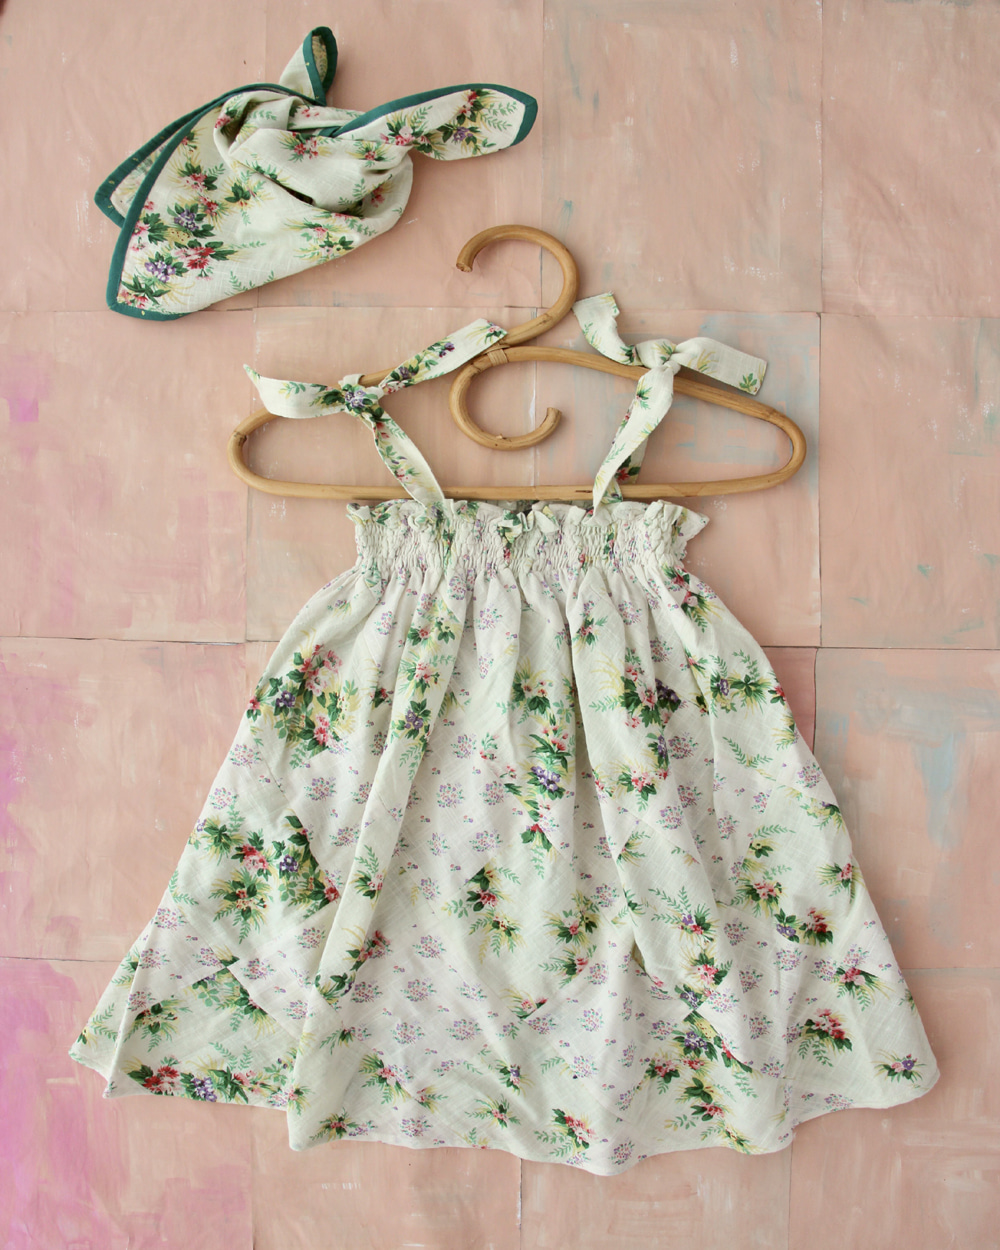 [BONJOUR]Patchwork Skirt Dress with Scarf /Green gold dot fabric [4Y,8Y,10Y]